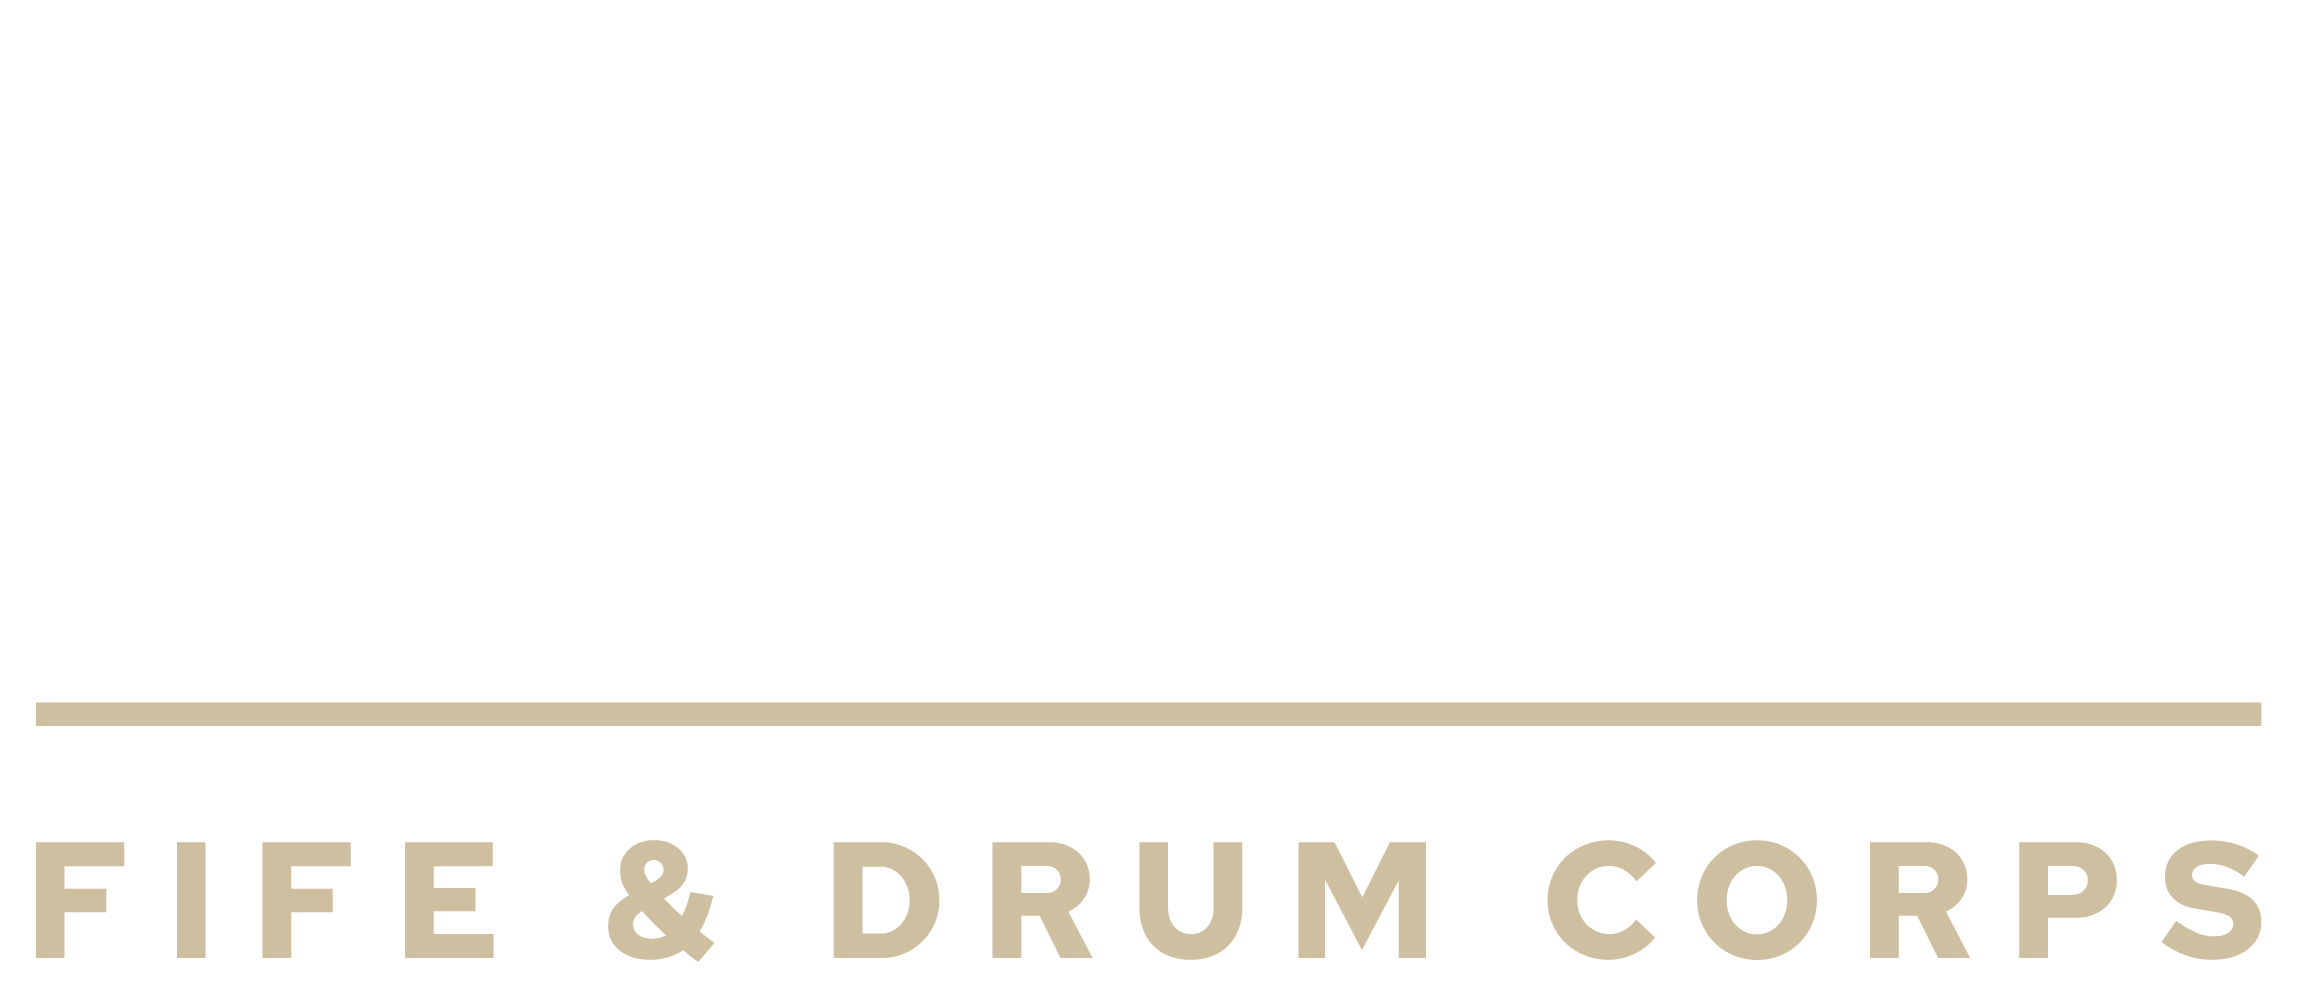 Traditional Collective